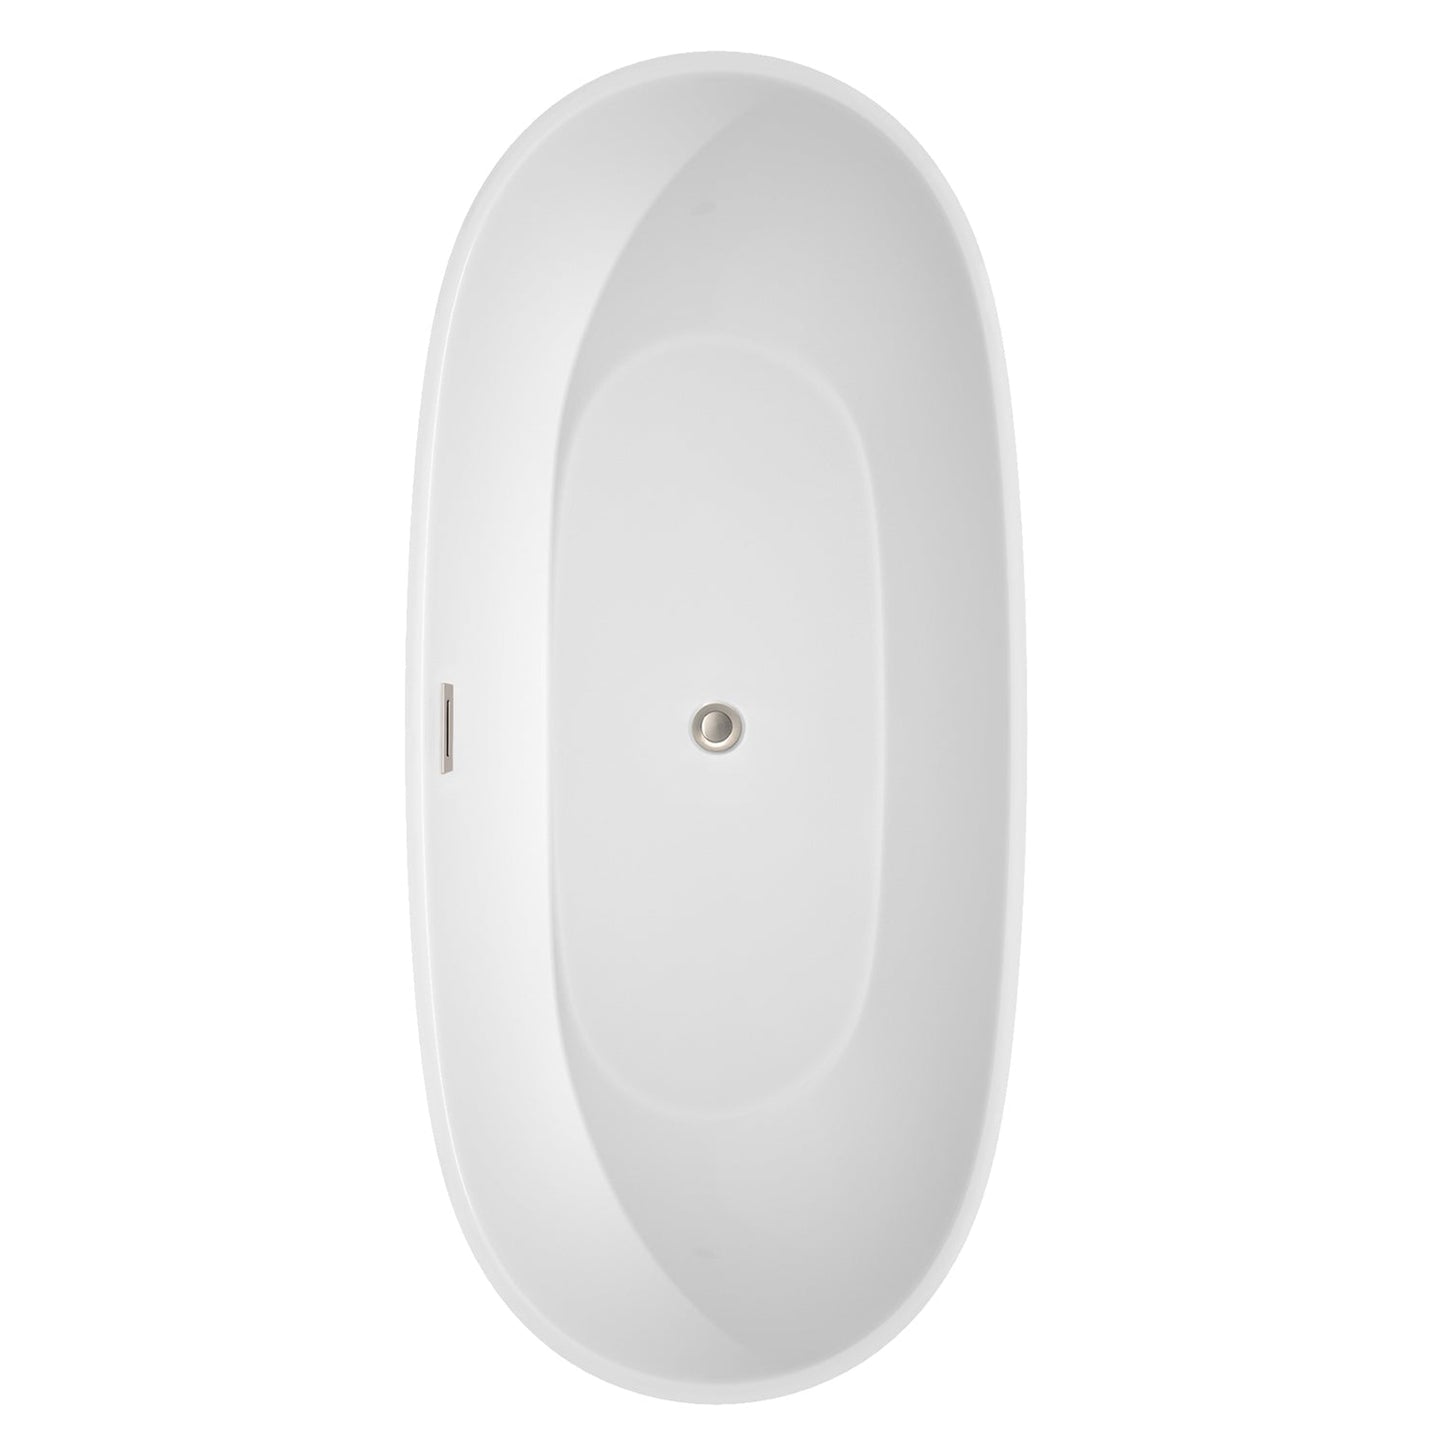 Wyndham Collection Juno 71" Freestanding Bathtub in White With Brushed Nickel Drain and Overflow Trim